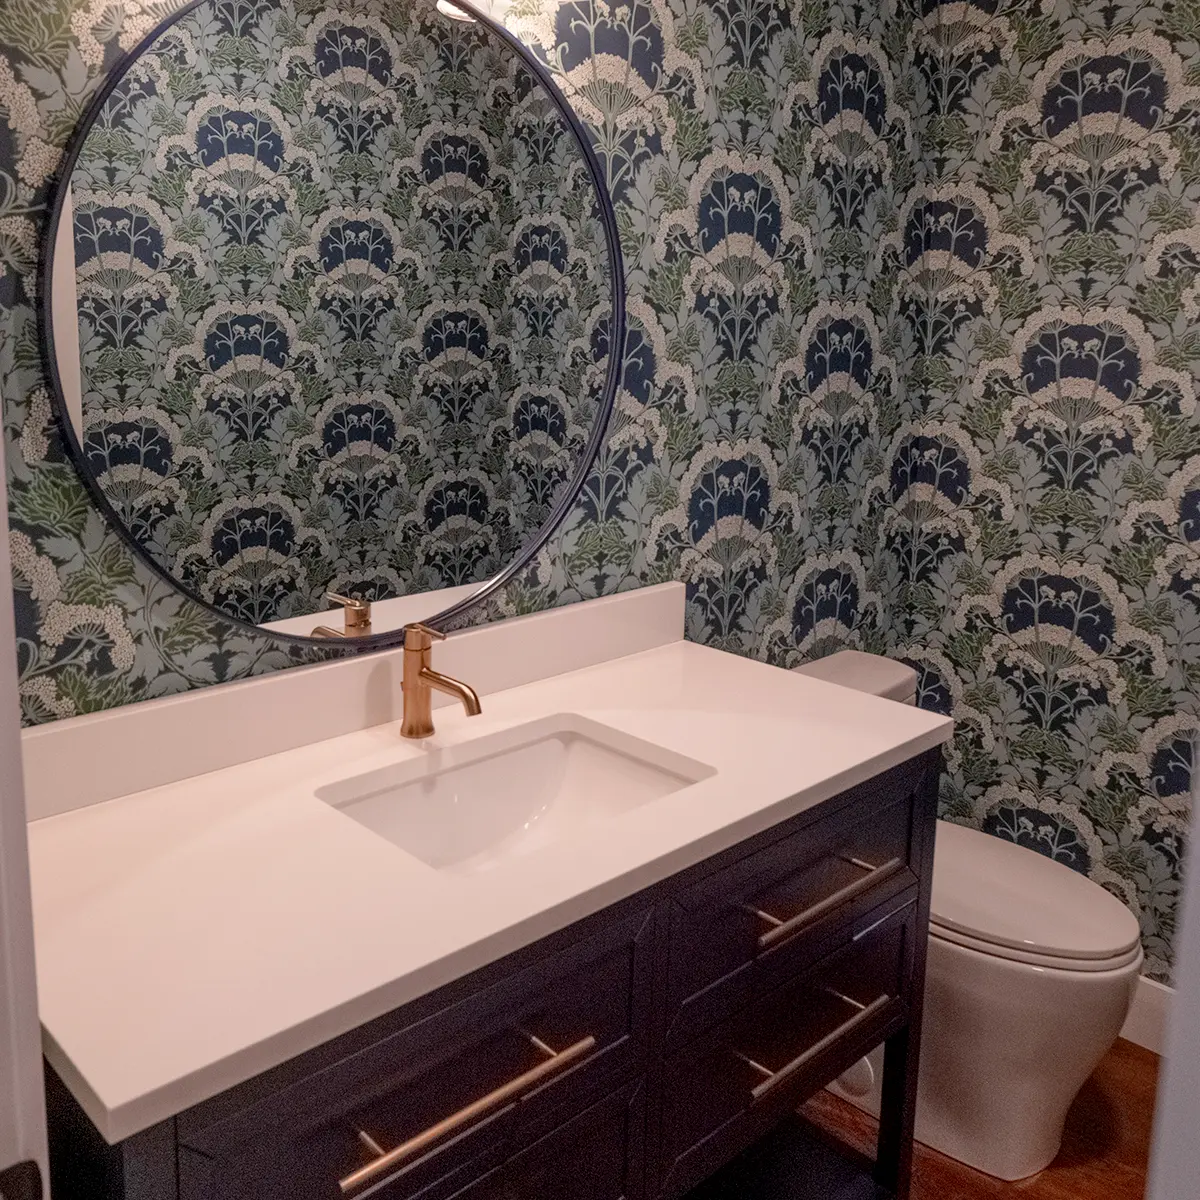 A powder room with a beautiful vanity and wallpaper